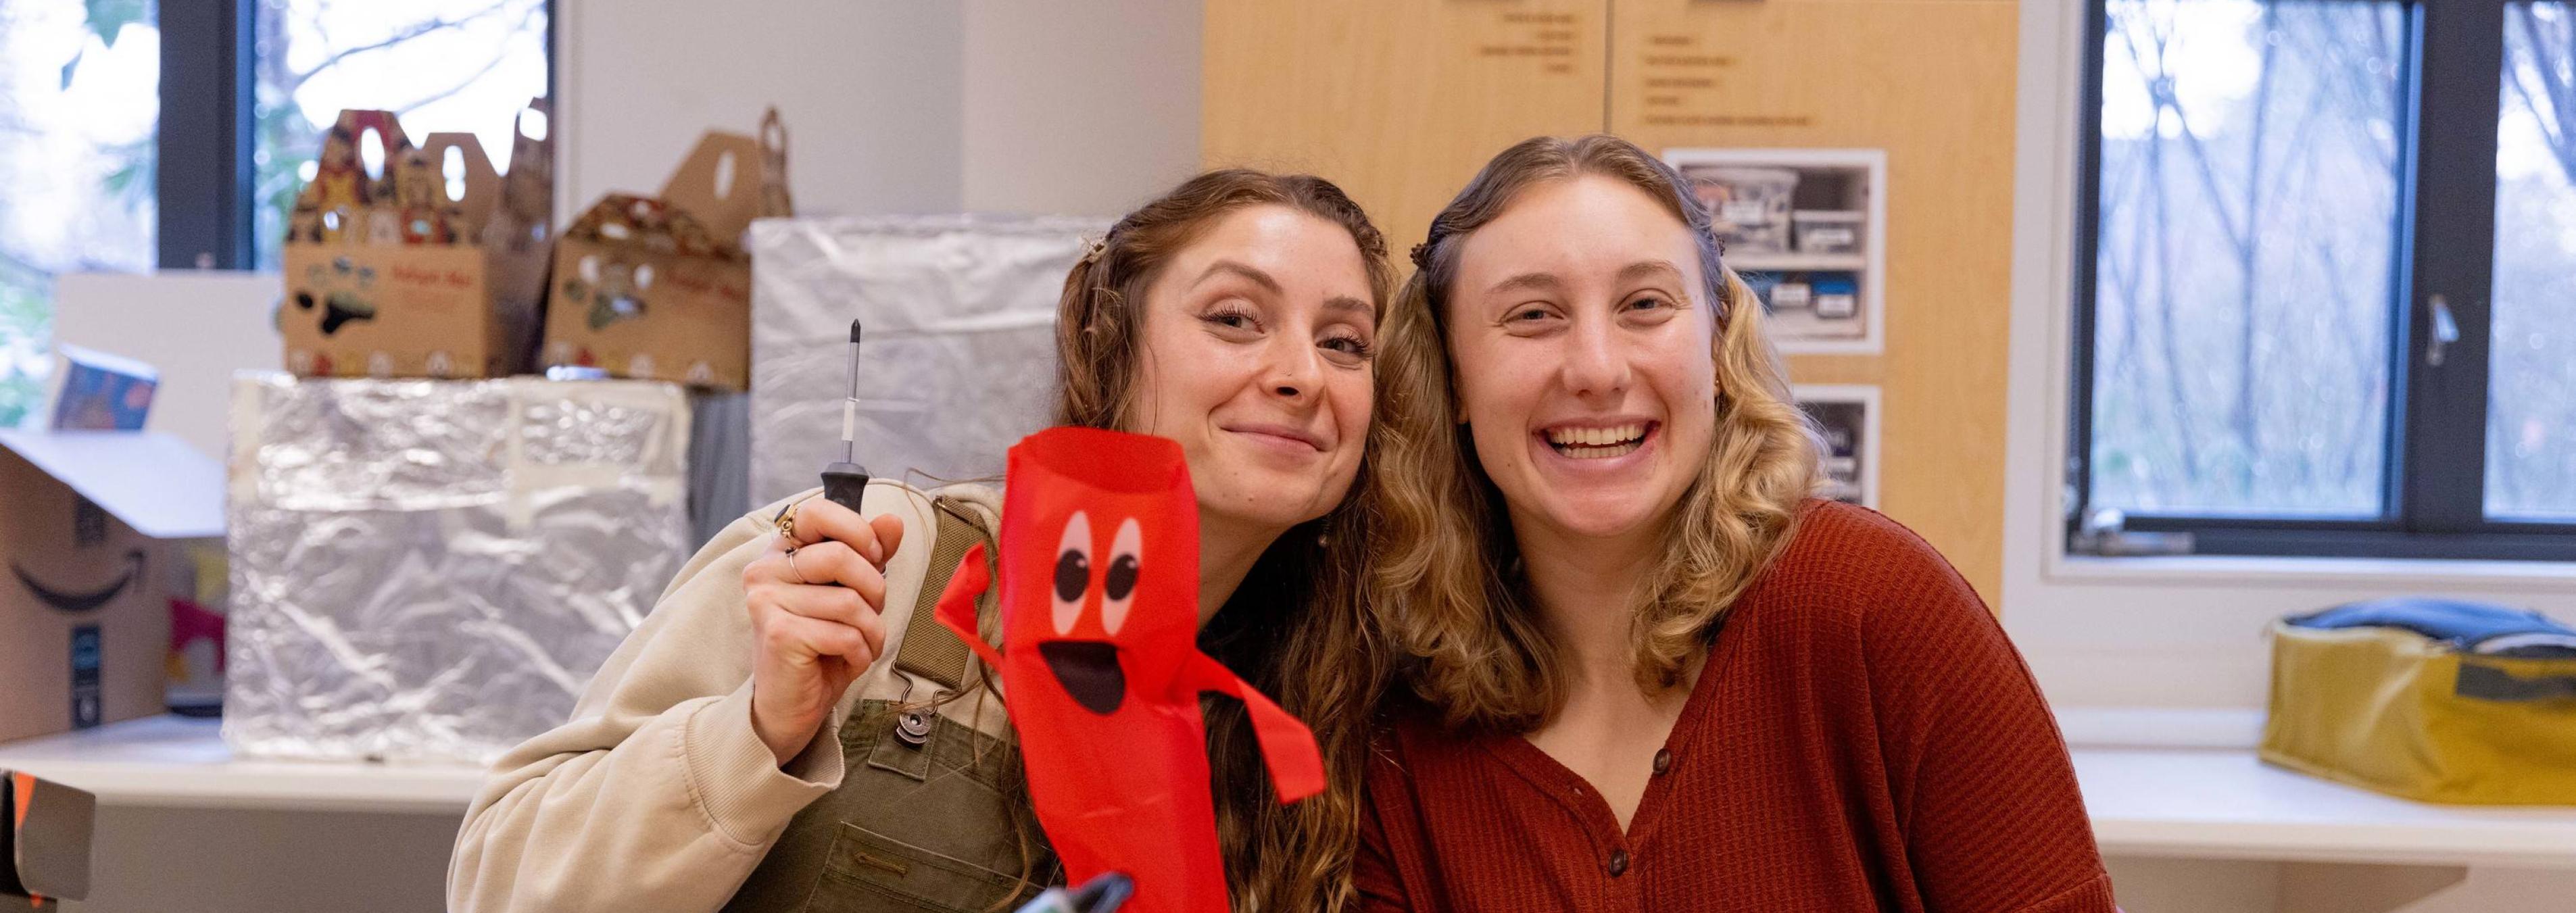 OT students modify toys to make them accessible for children of all abilities.